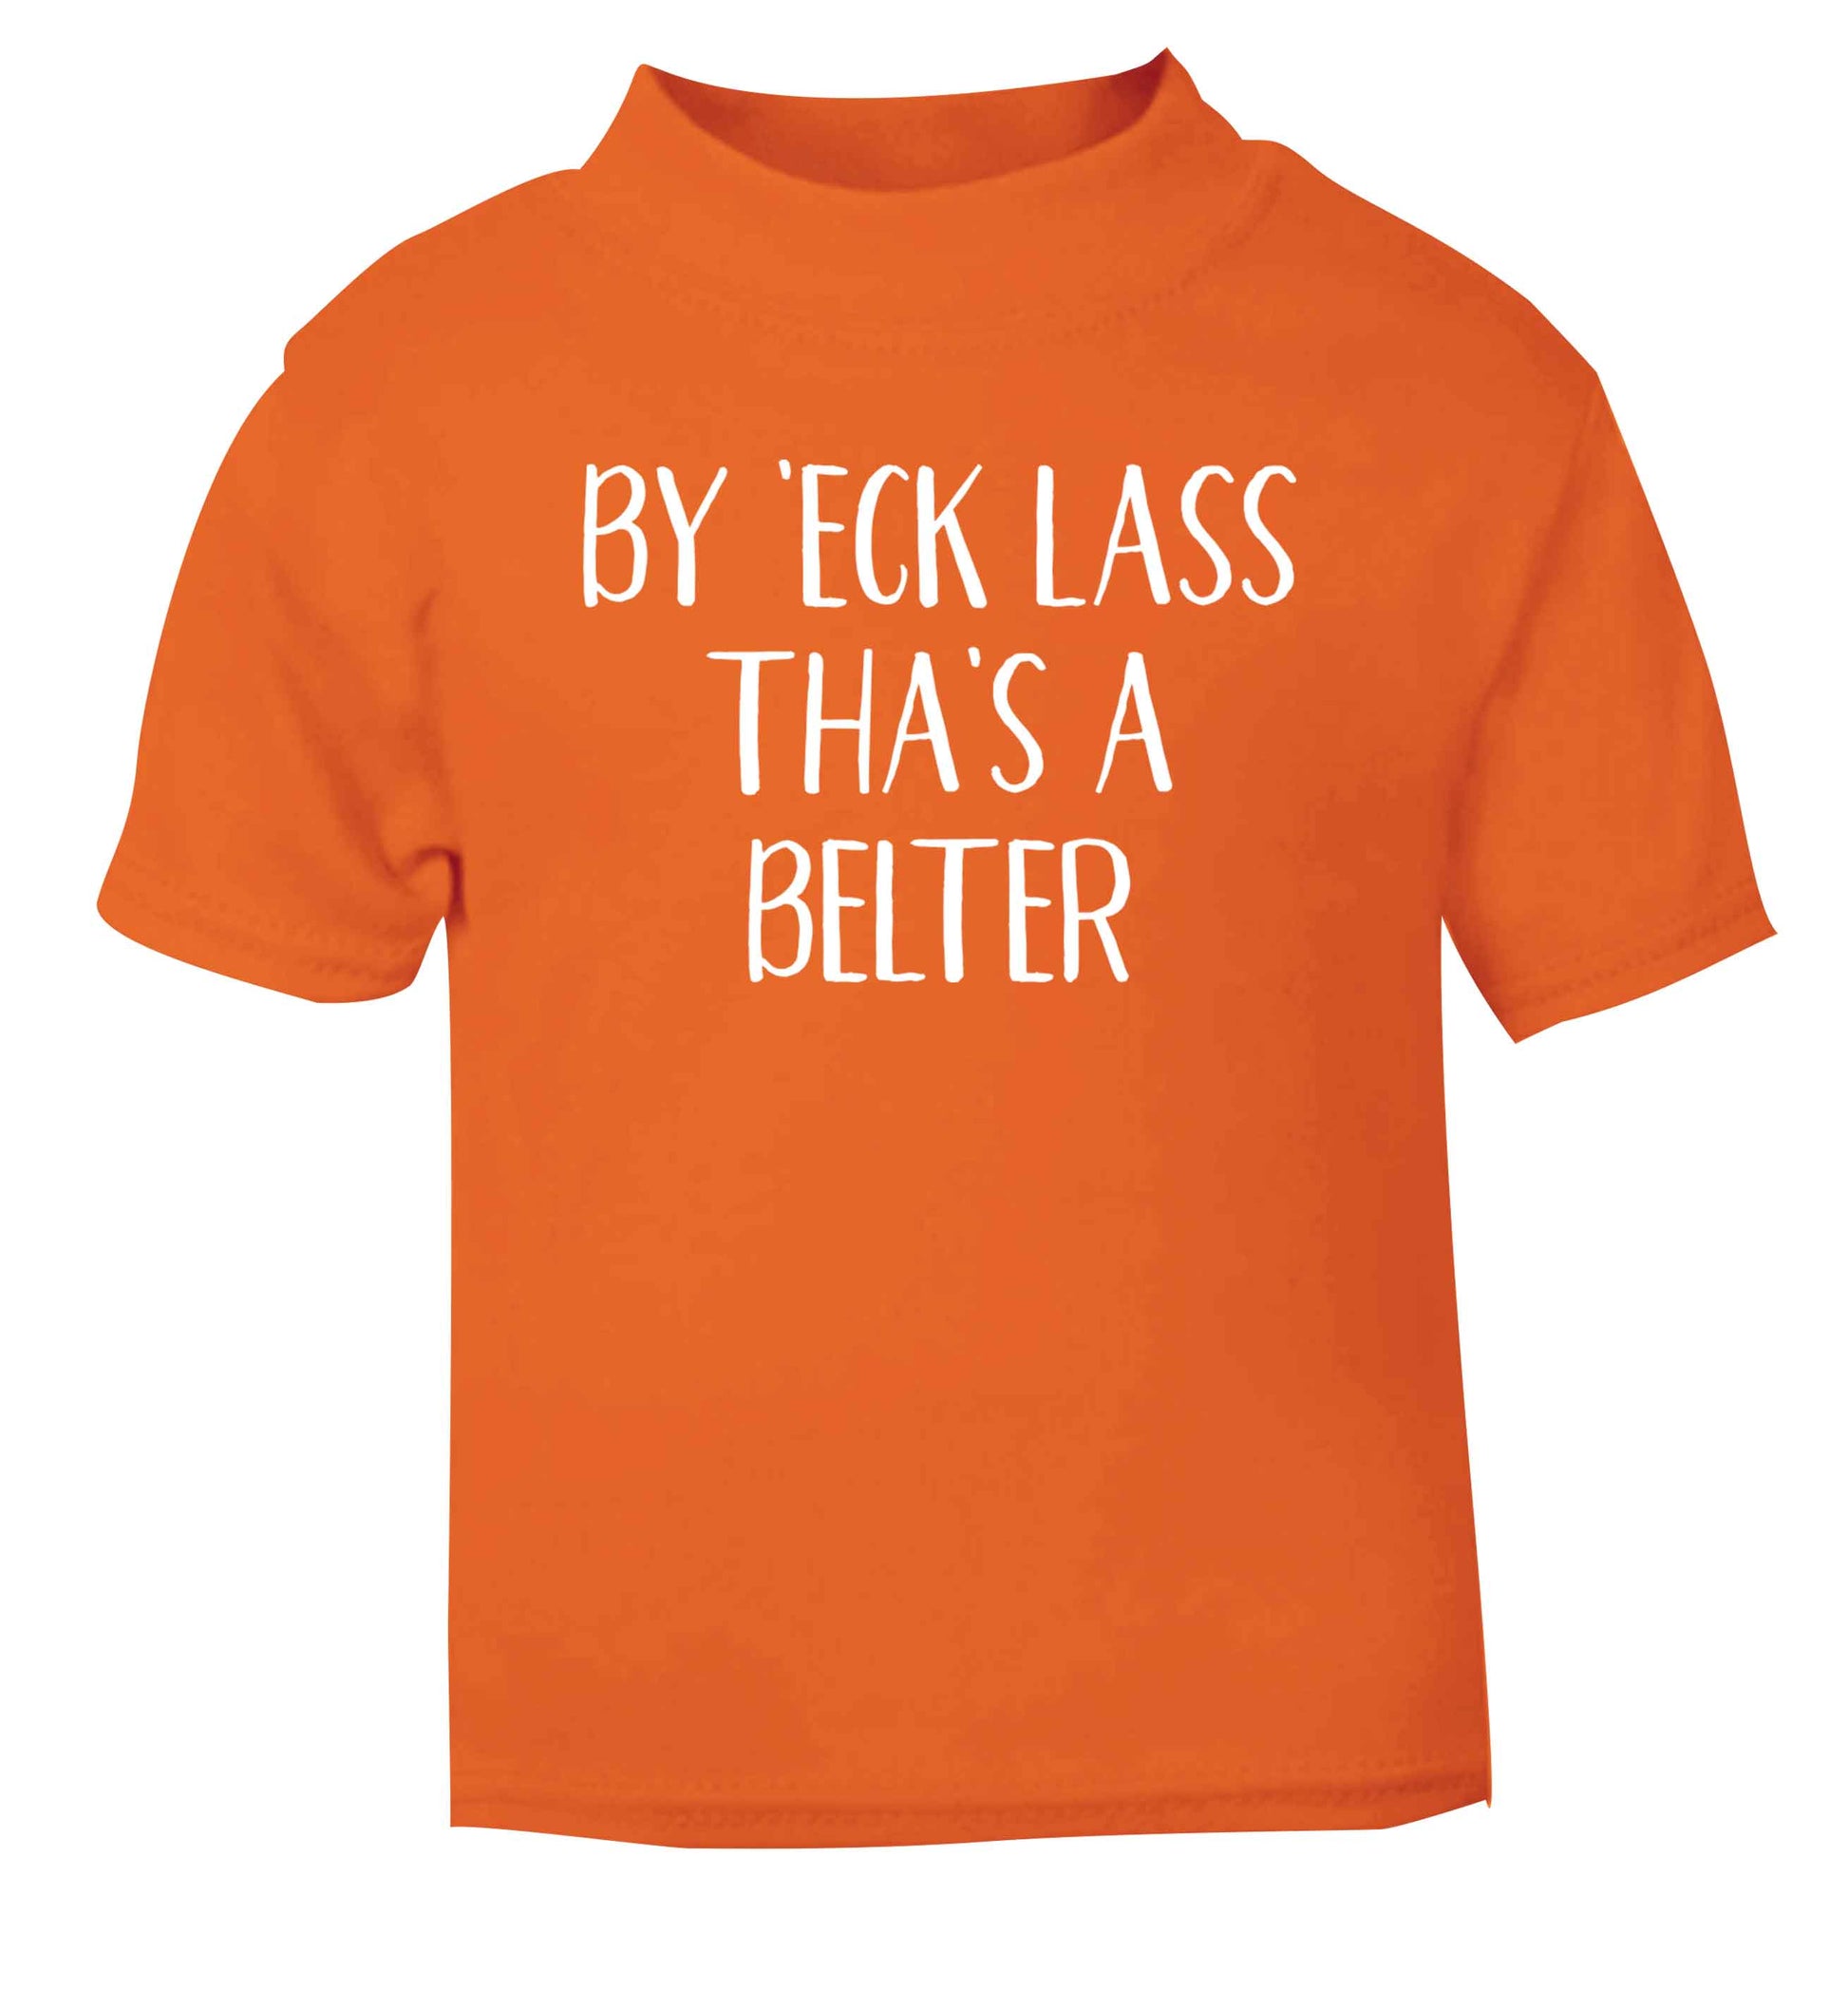 Be 'eck lass tha's a belter orange Baby Toddler Tshirt 2 Years